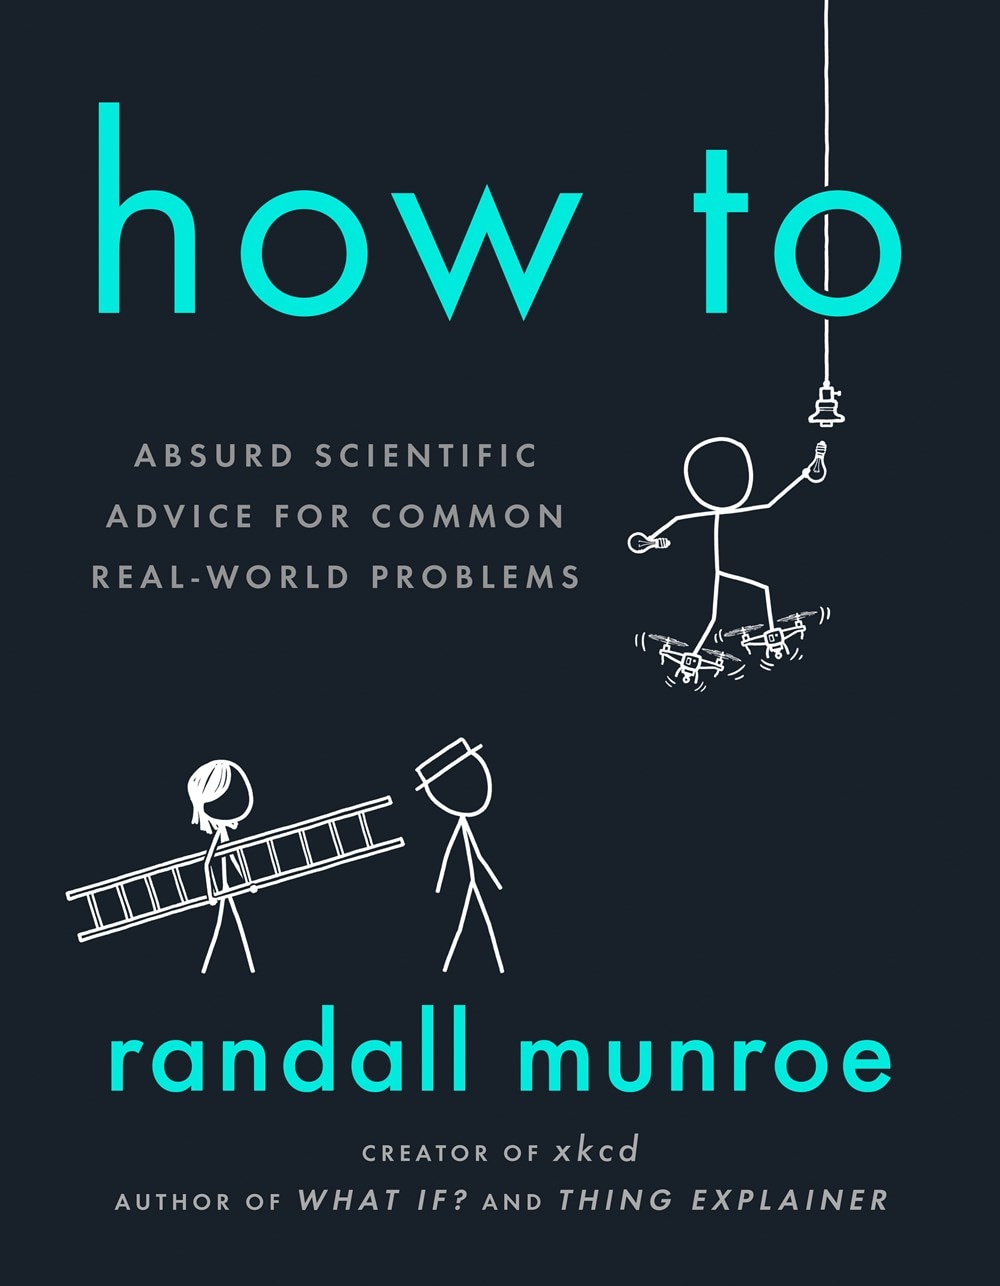 How to: Absurd Scientific Advice for Common Real-World Problems